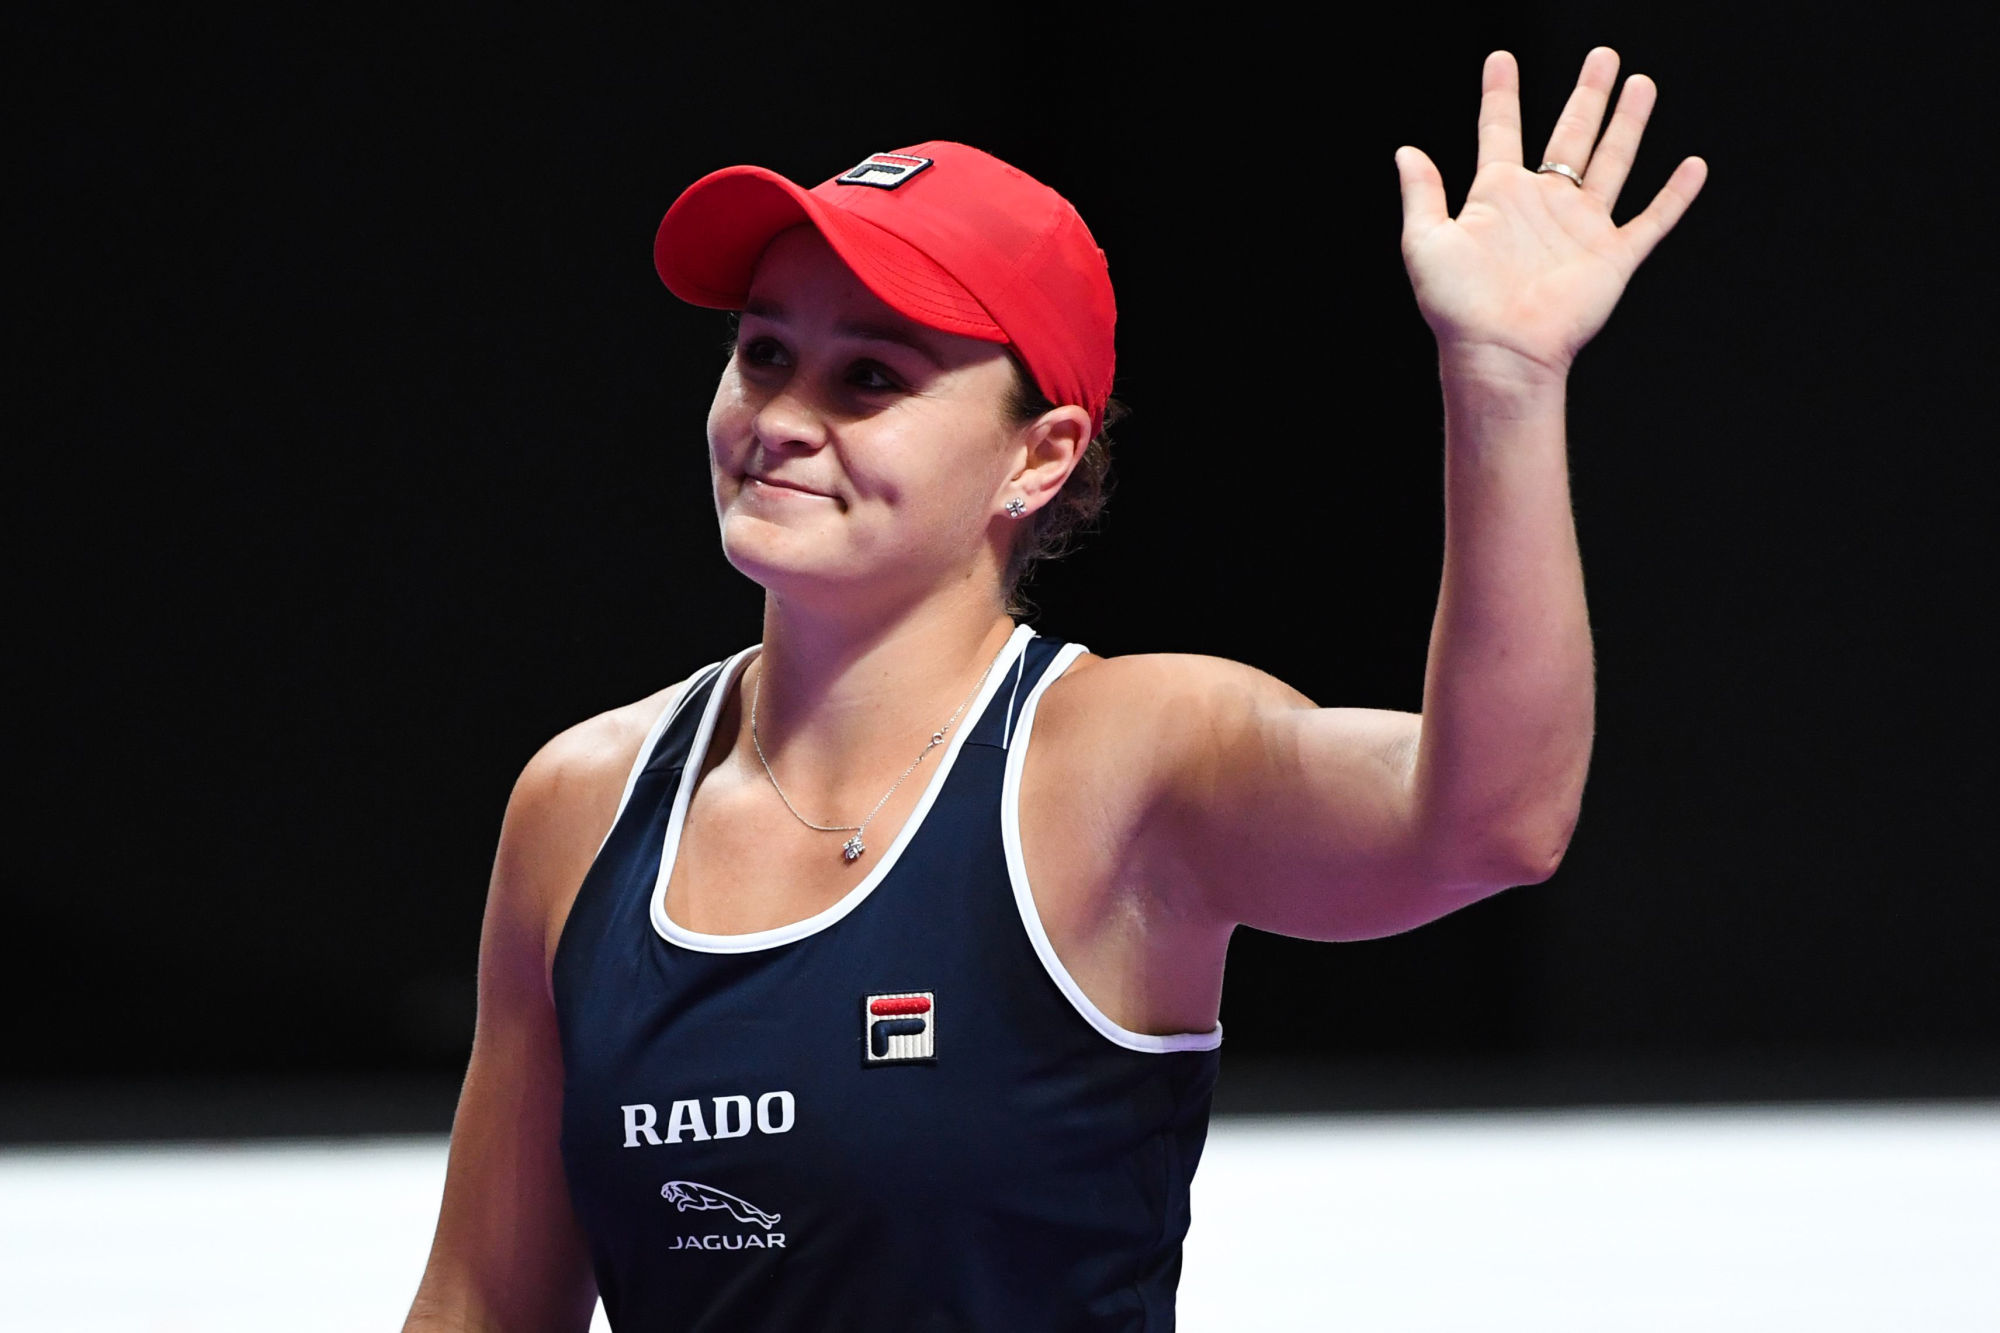 (191031) -- SHENZHEN, Oct. 31, 2019 (Xinhua) -- Ashleigh Barty of Australia greets the spectators after the women's singles round robin match against Petra Kvitova of the Czech Republic at the WTA Finals Tennis Tournament in Shenzhen, south China's Guangdong Province, Oct. 31, 2019. (Xinhua/Liang Xu) (Photo by Xinhua/Sipa USA) 

Photo by Icon Sport - Ashleigh BARTY - Shenzhen (Chine)